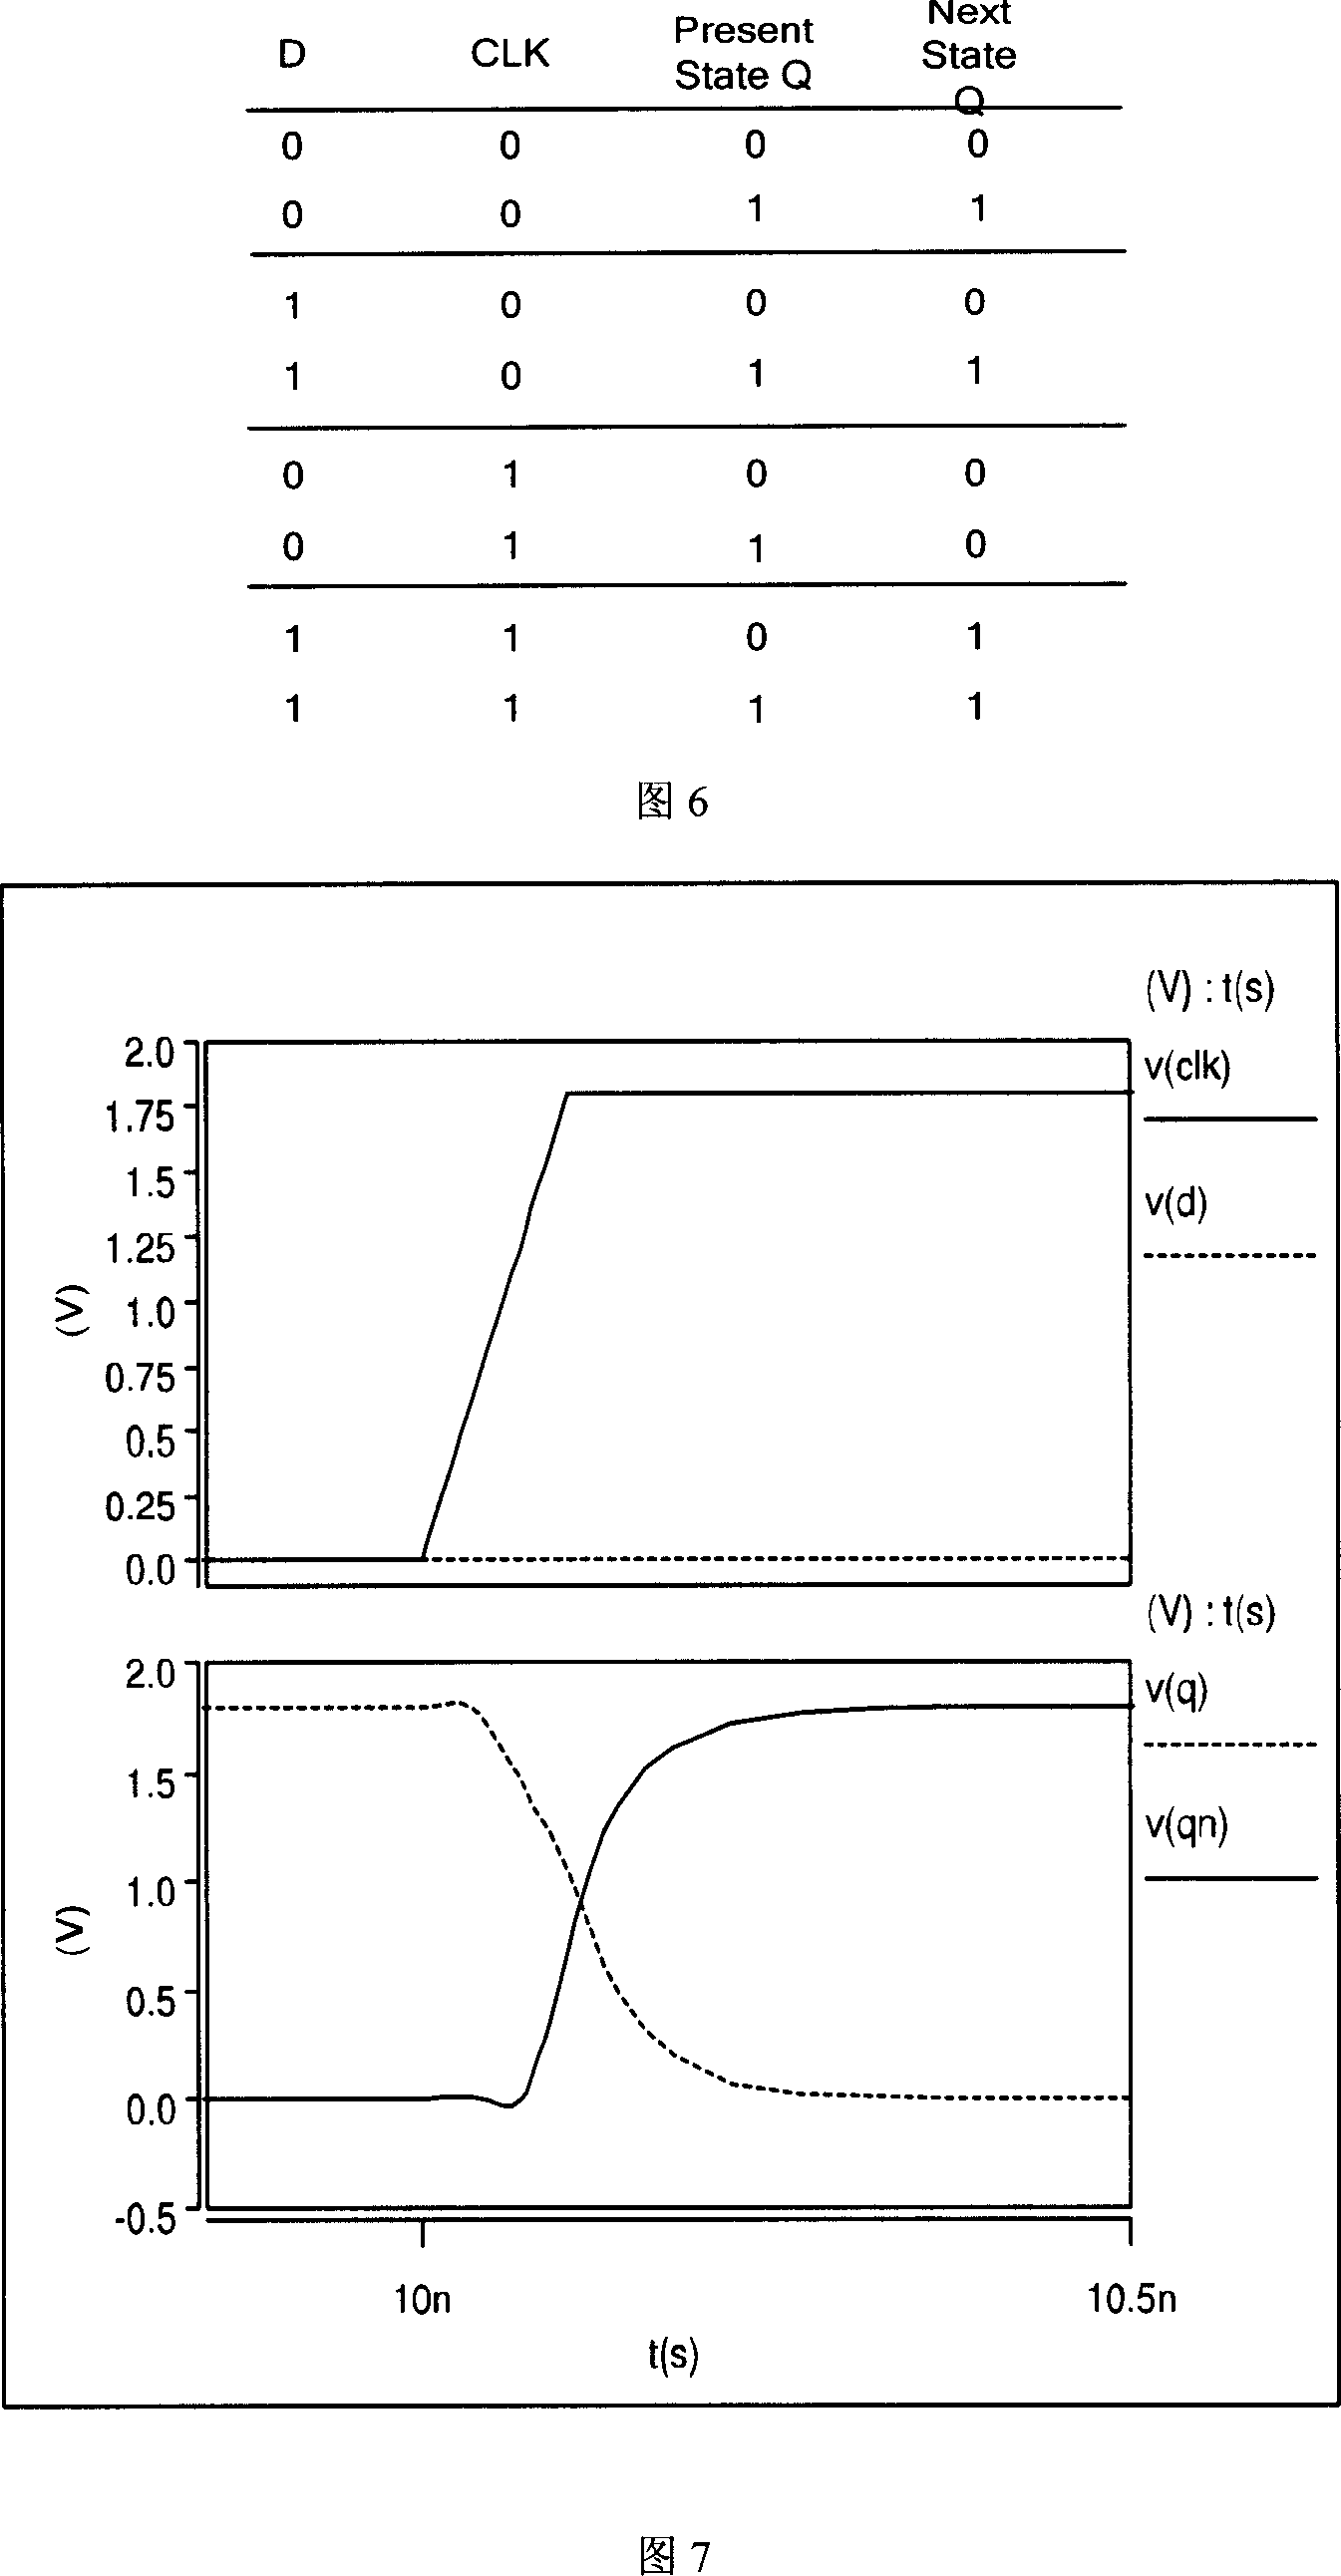 CMOS symmetrical output D flip-latch with self-correction function